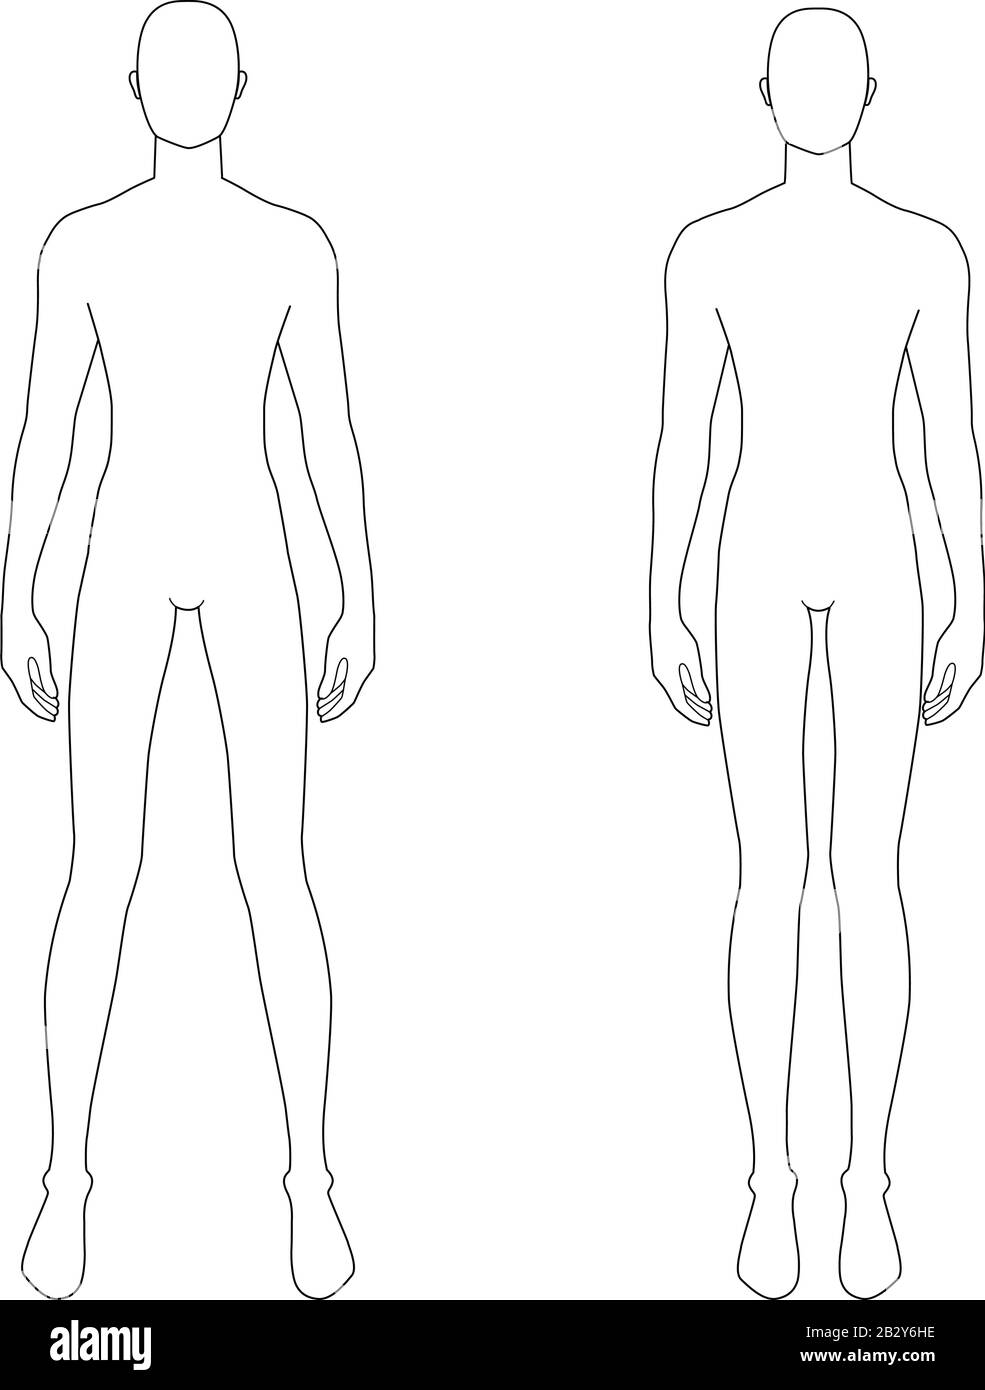 standing poses for men